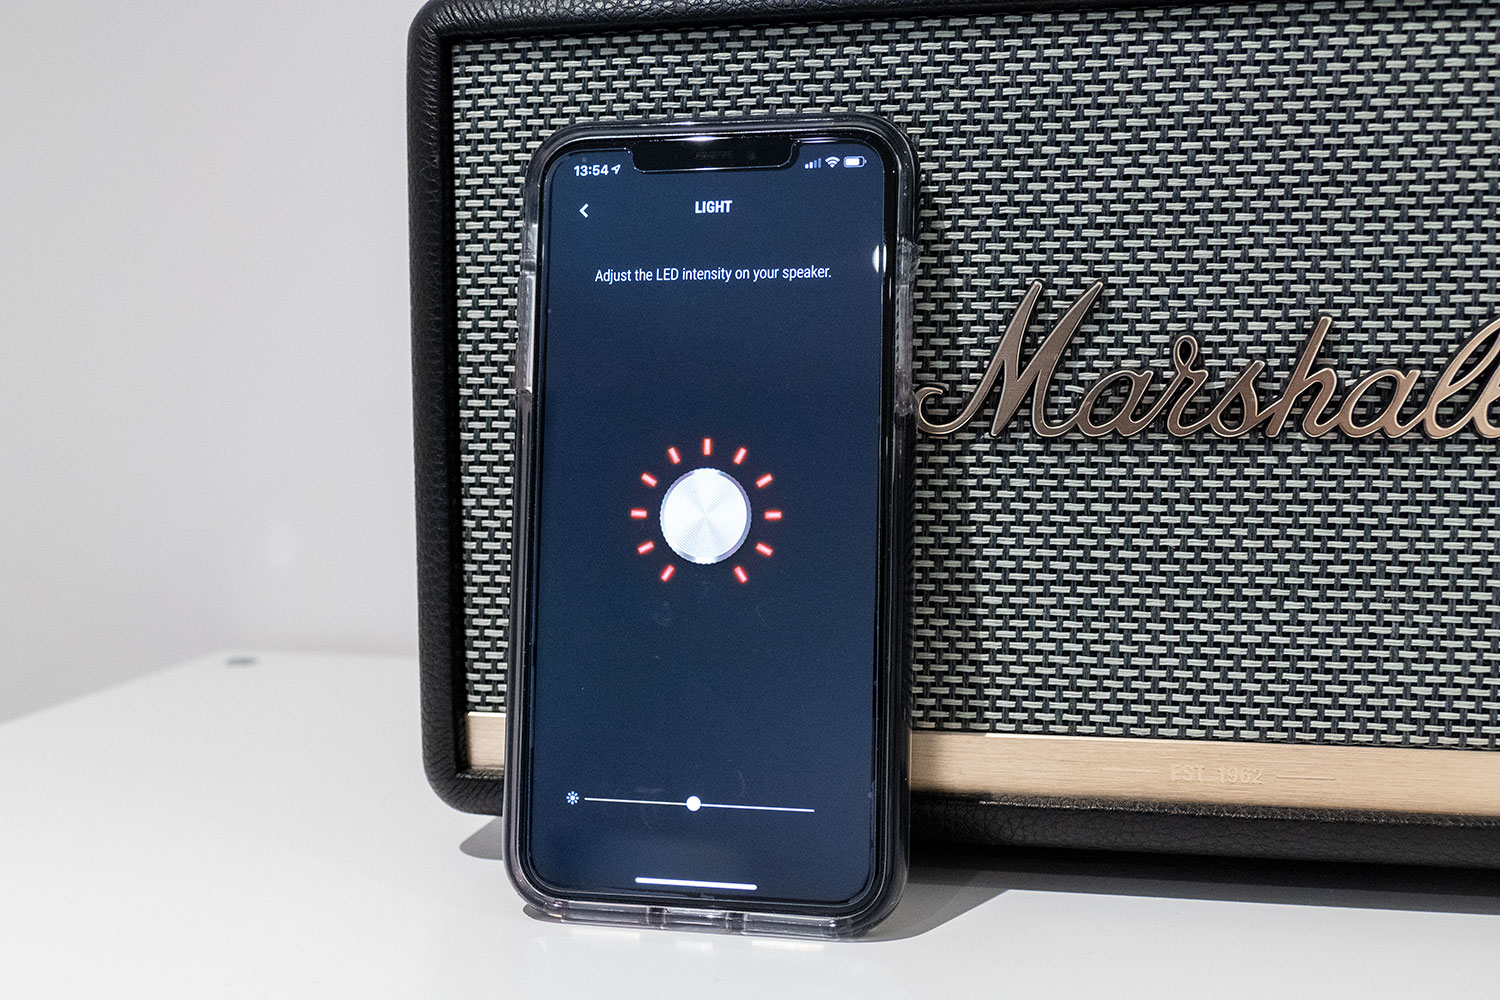 Marshall Stanmore II Voice Review: A Bluetooth Speaker That's Ready to Rock